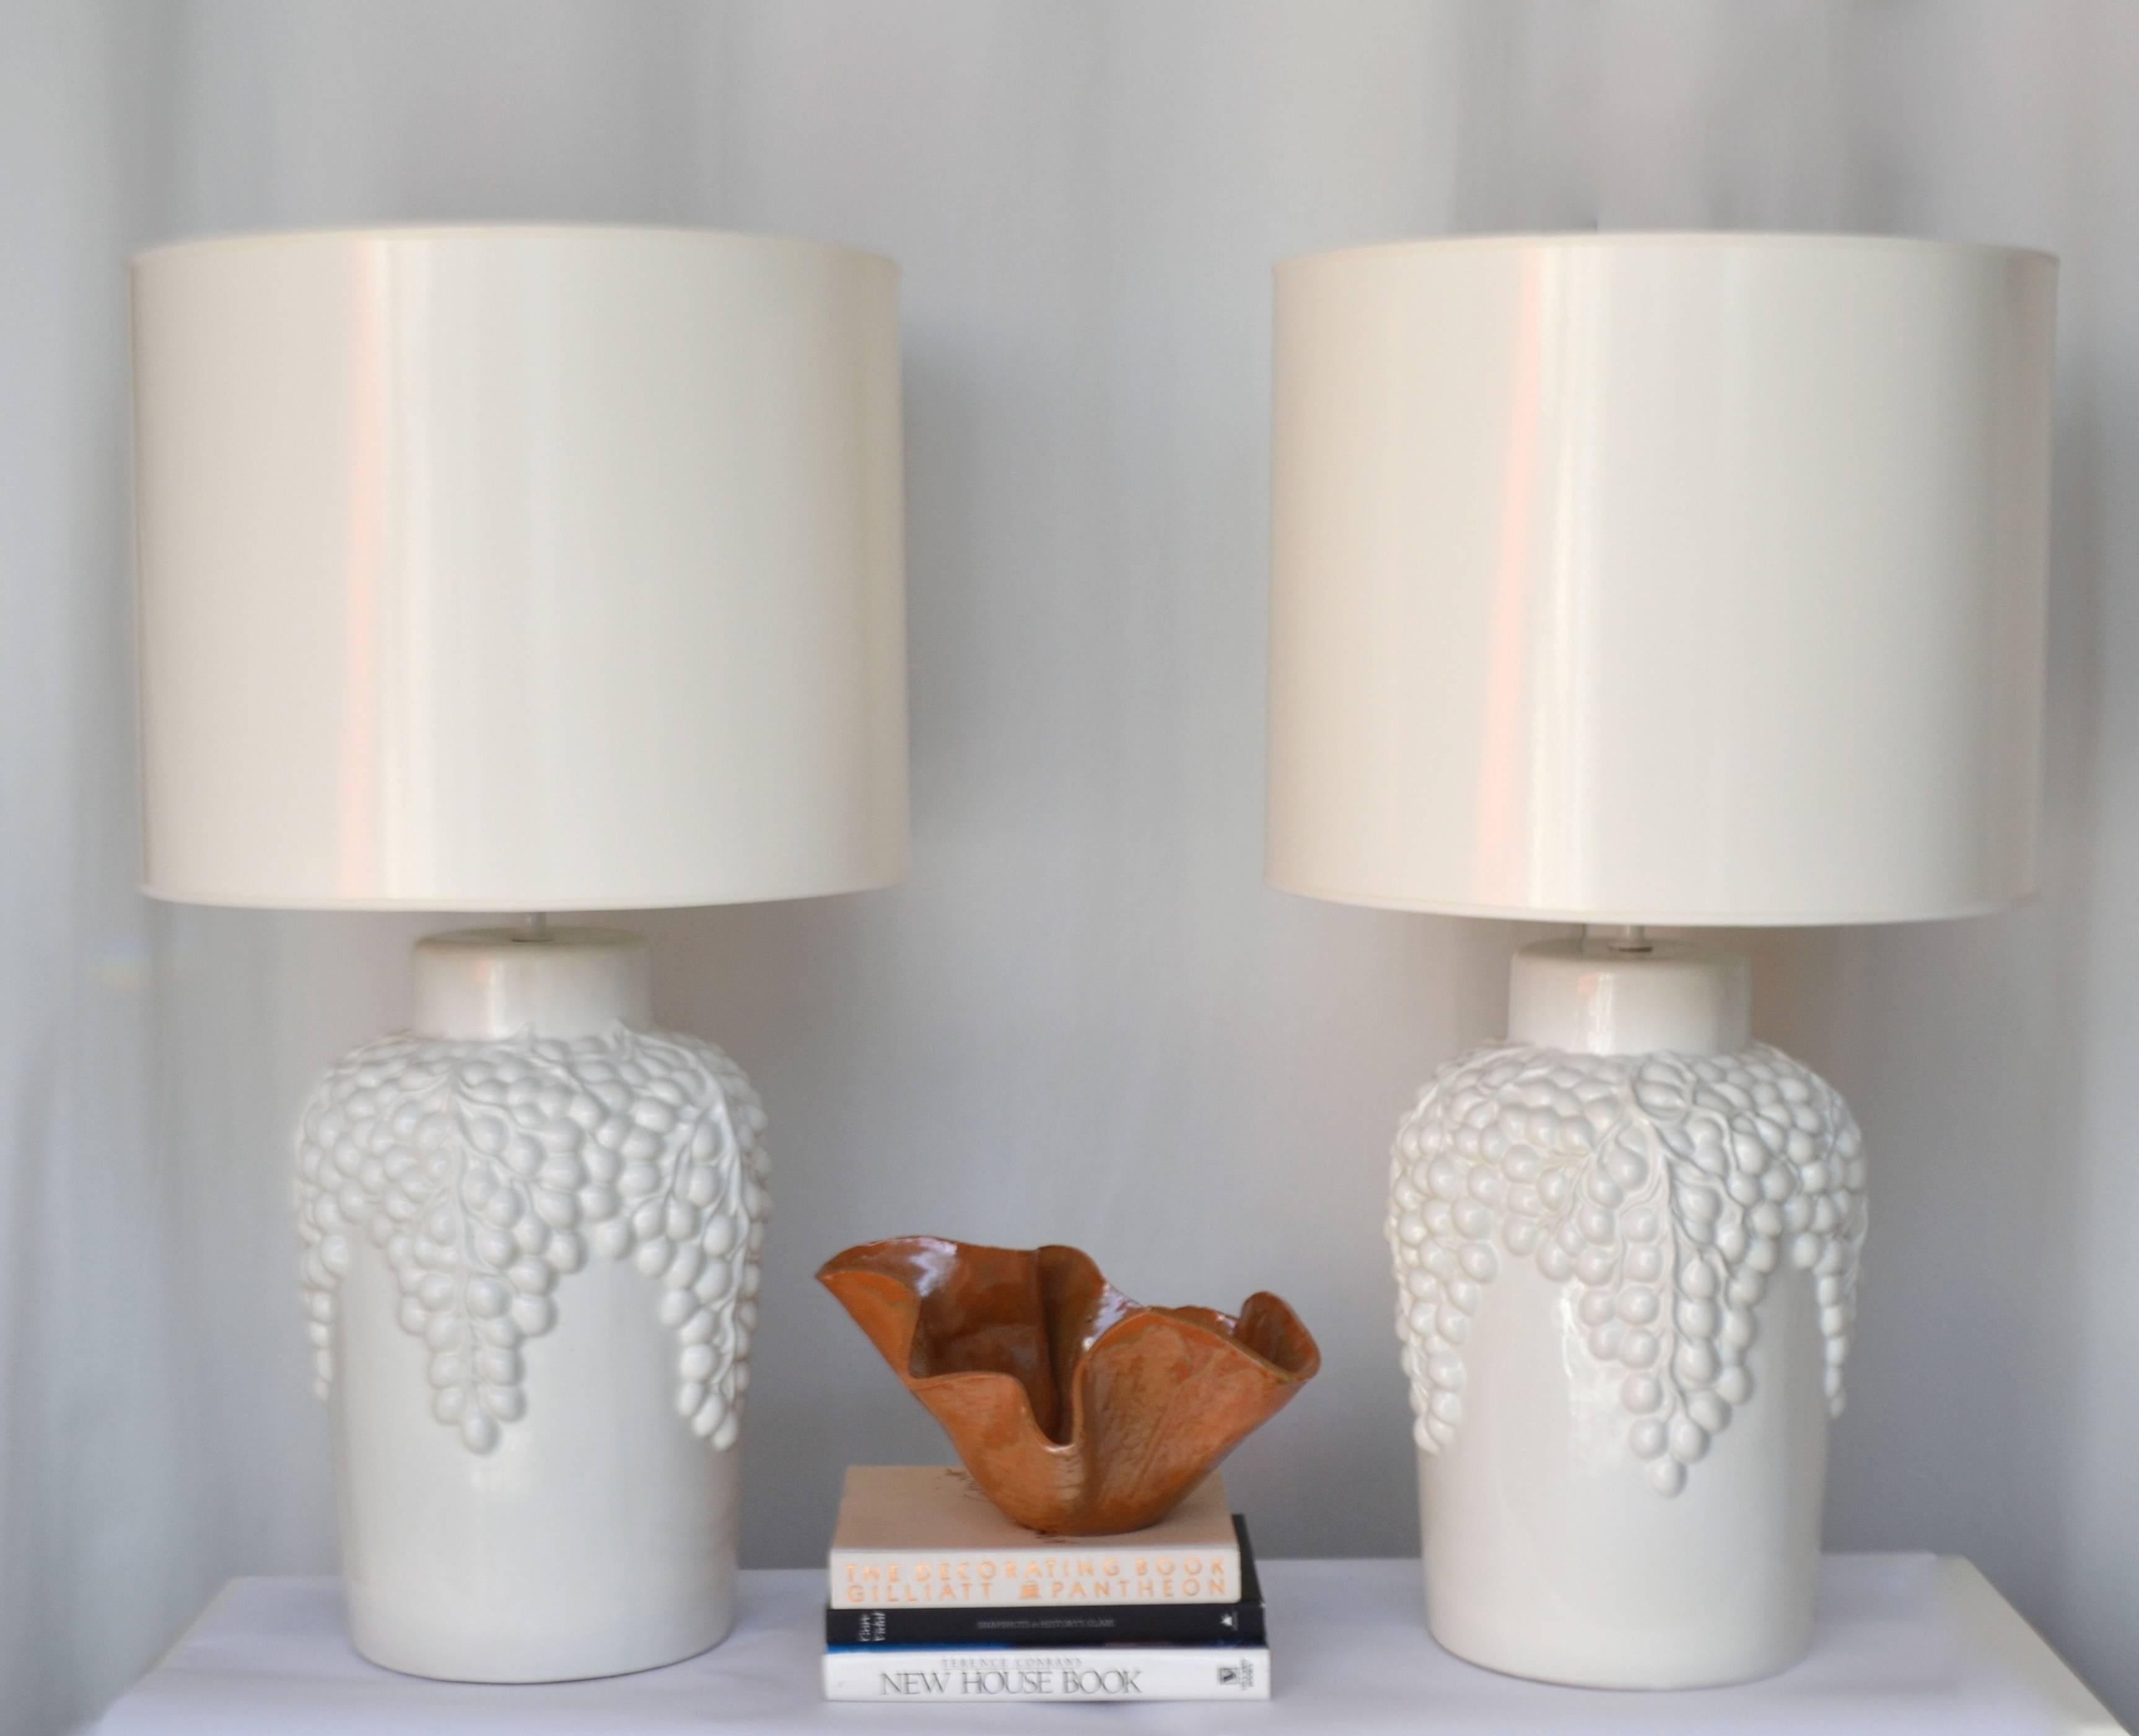 Glamorous pair of Hollywood Regency Blanc de Chine jar form table lamps, Italy, circa 1950s-1960s. These striking artisan thrown lamps are finished in a white glaze and adorned with a decorative grape motif. Wired with brass fittings.
Shades not